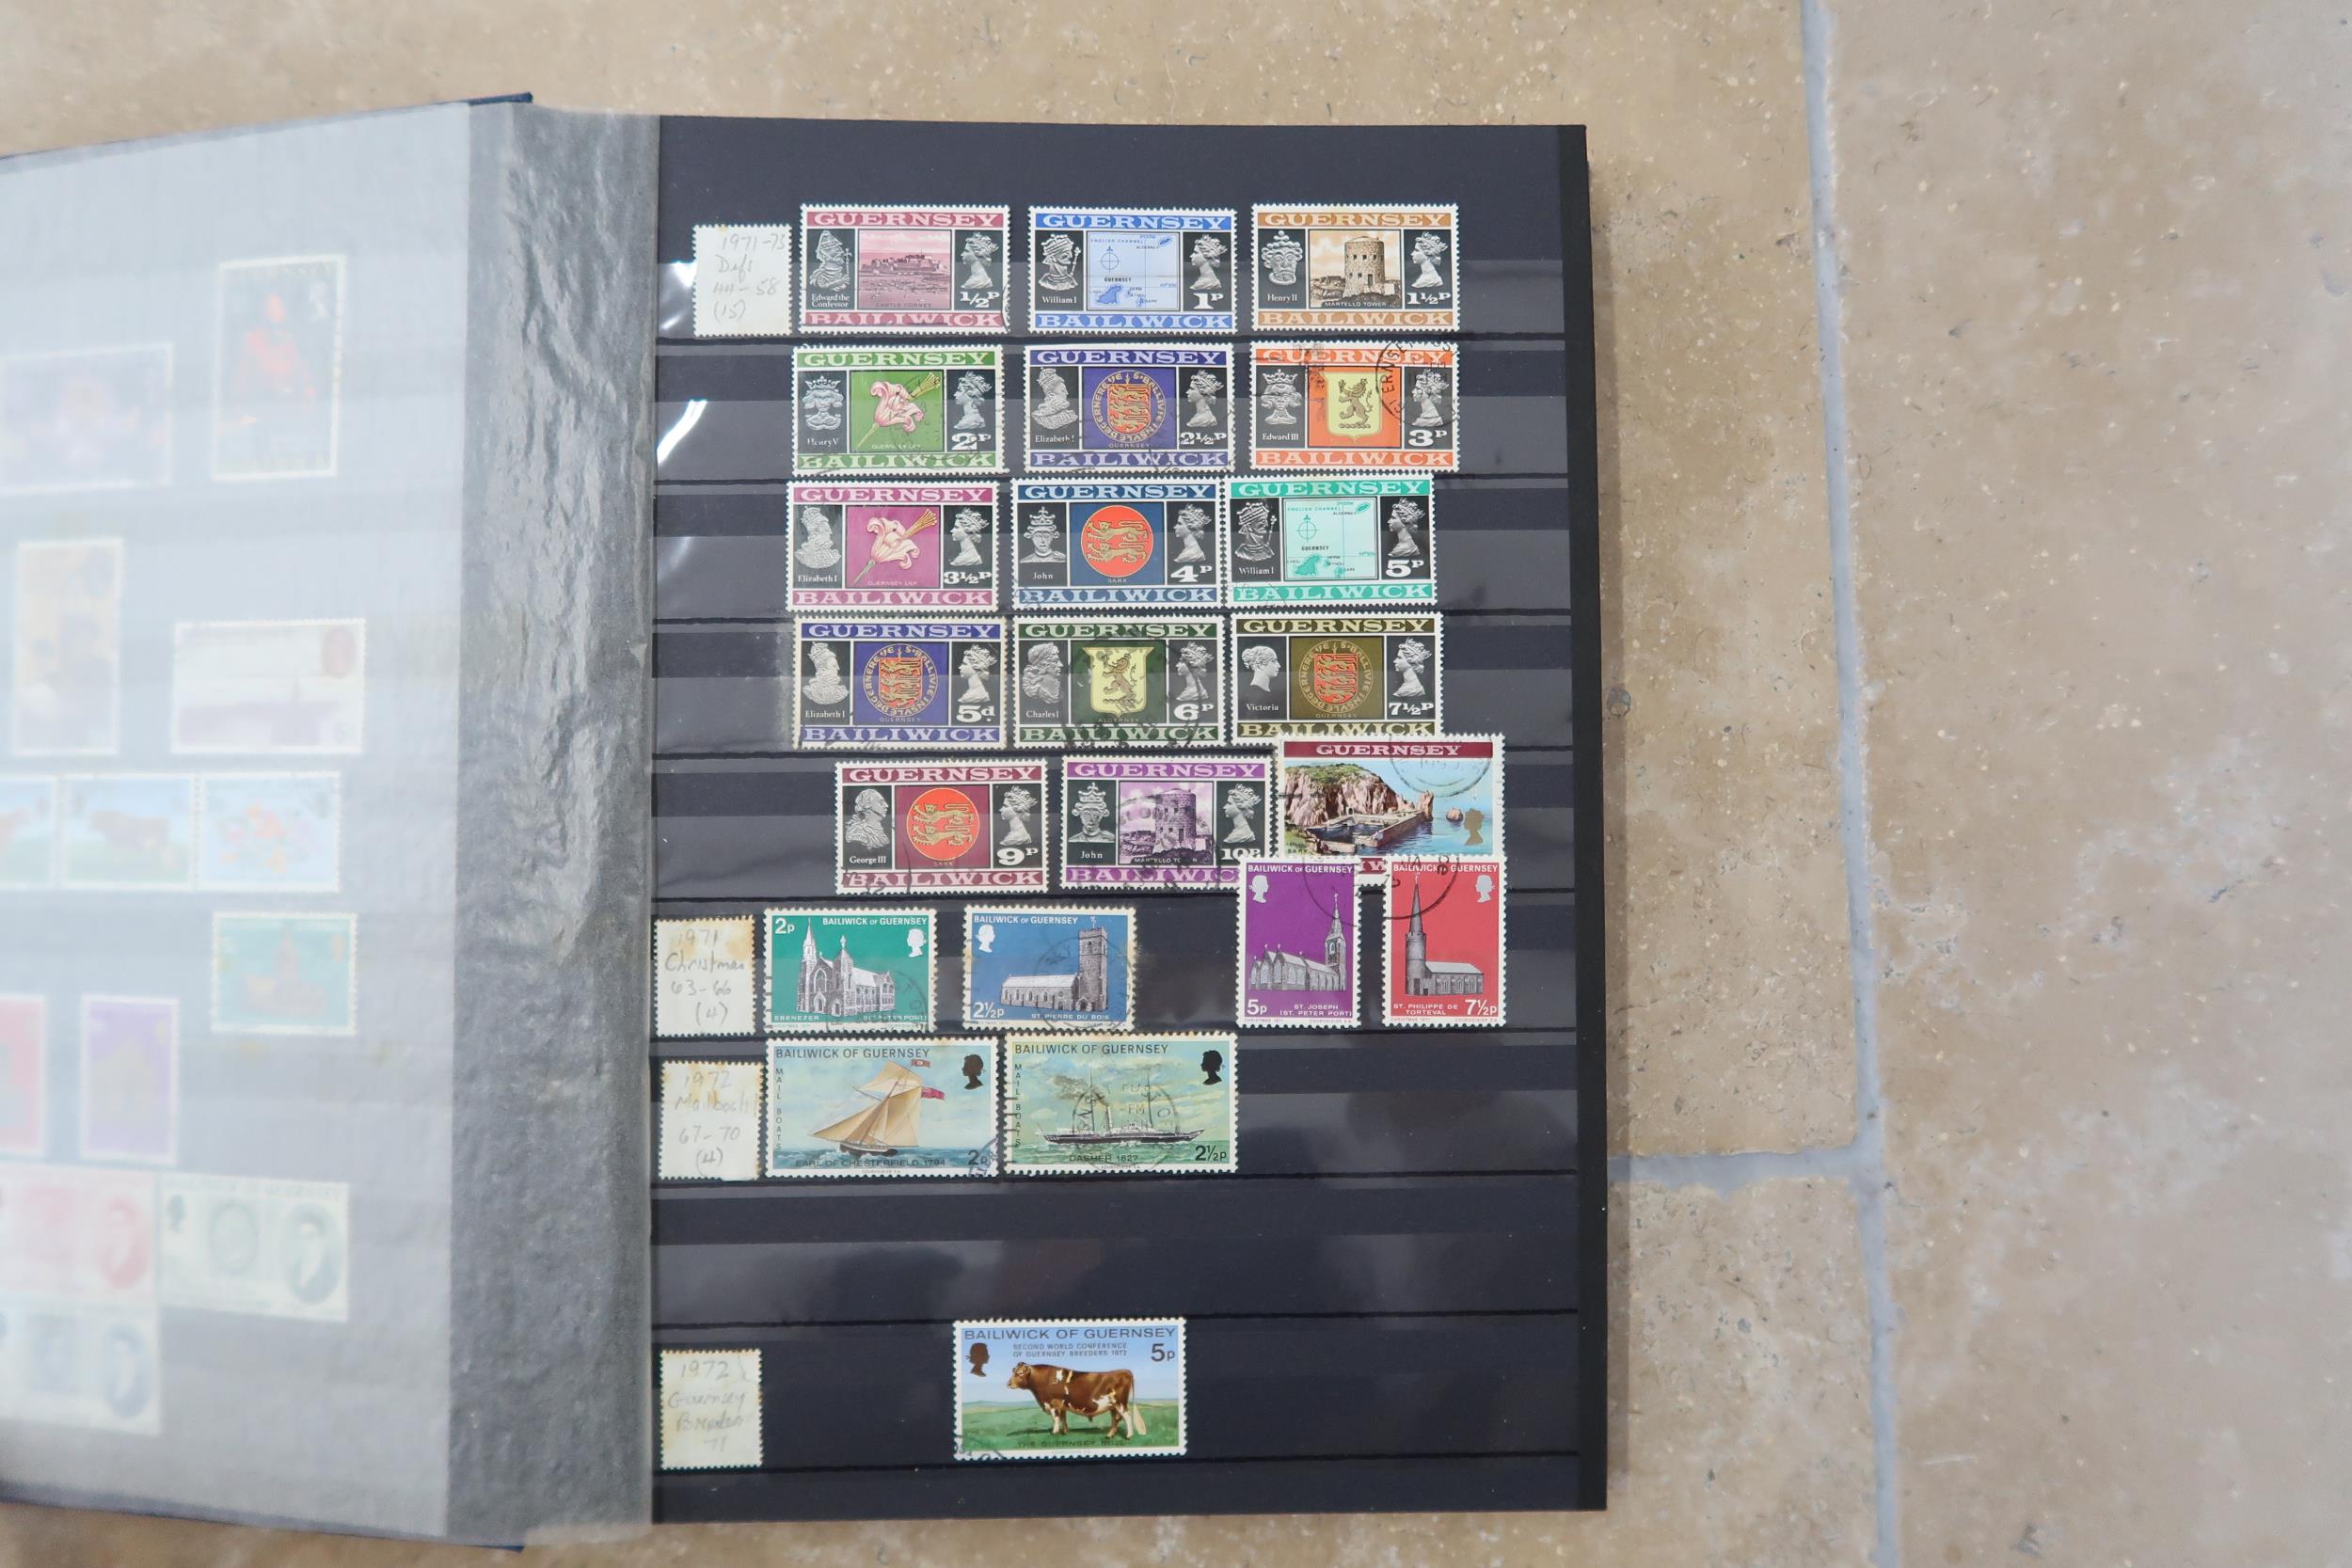 Five stamp albums including Jersey circa 1990's, Guernsey and Alderney, Great Britain circa 1990s, - Image 4 of 5